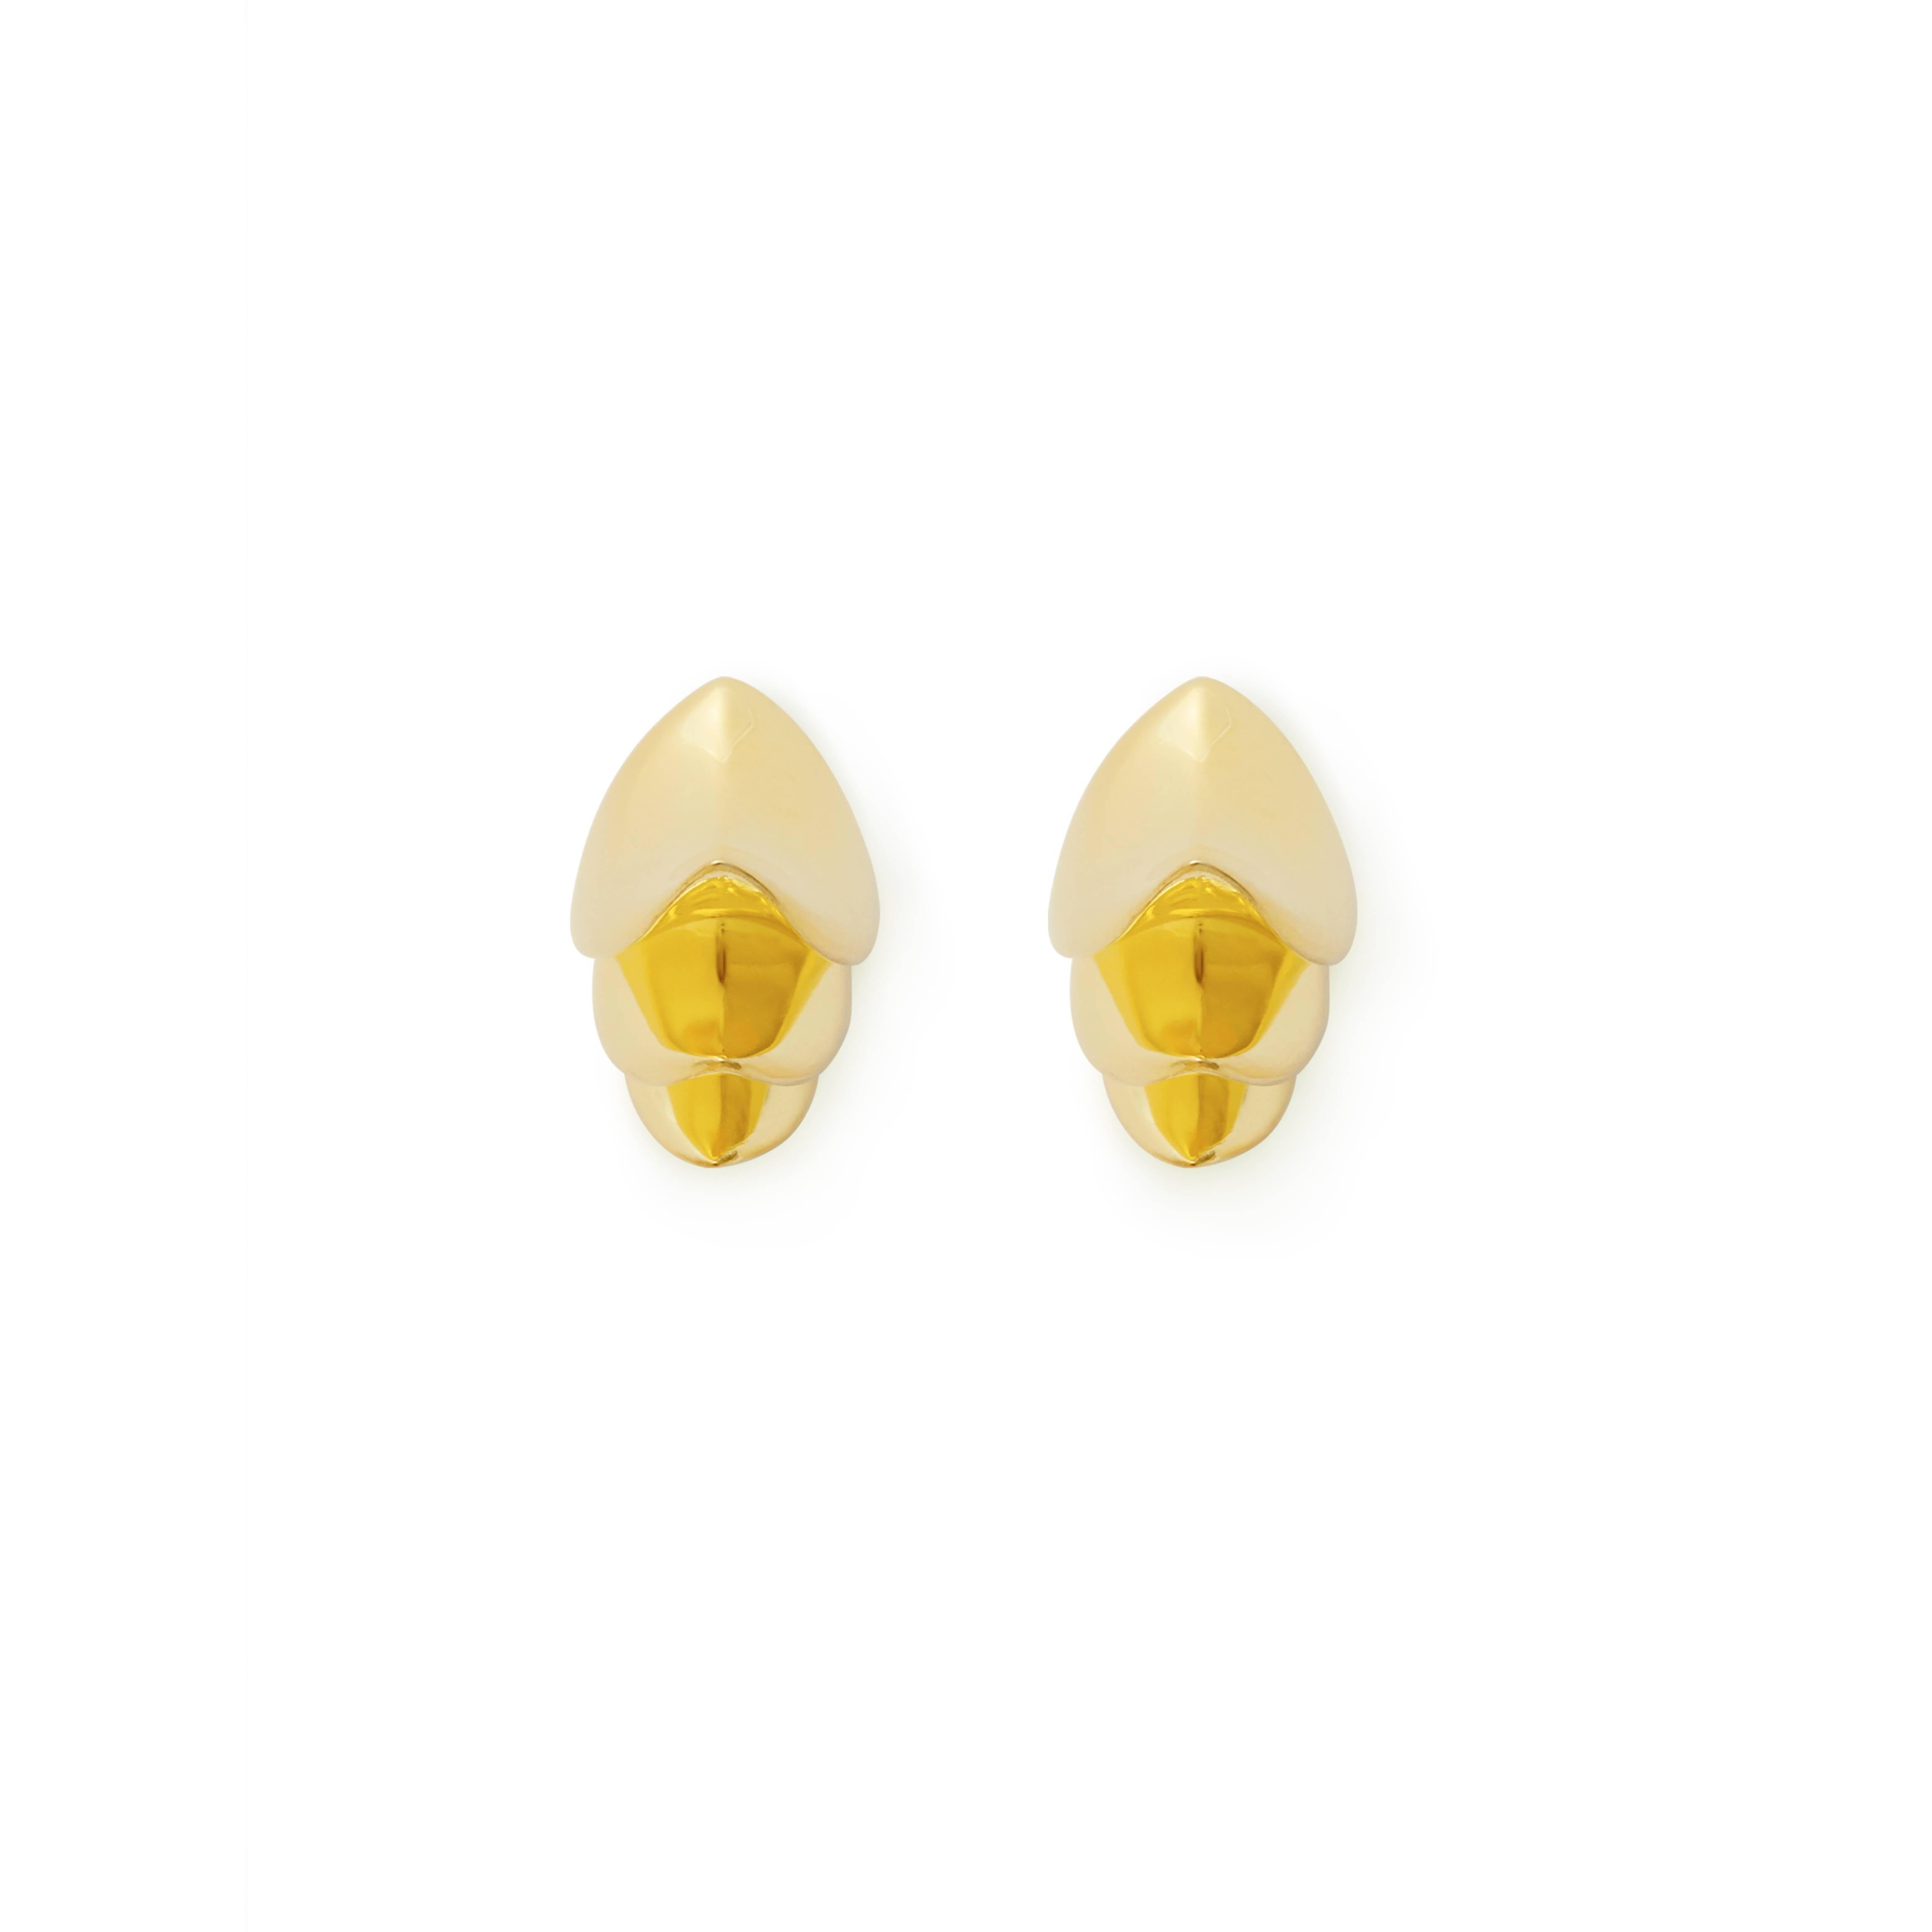 Thorn earrings from Mistova are handcrafted from the finest 18K gold. Easy to wear beautifull stud earrings with a sharp and fluid design. 